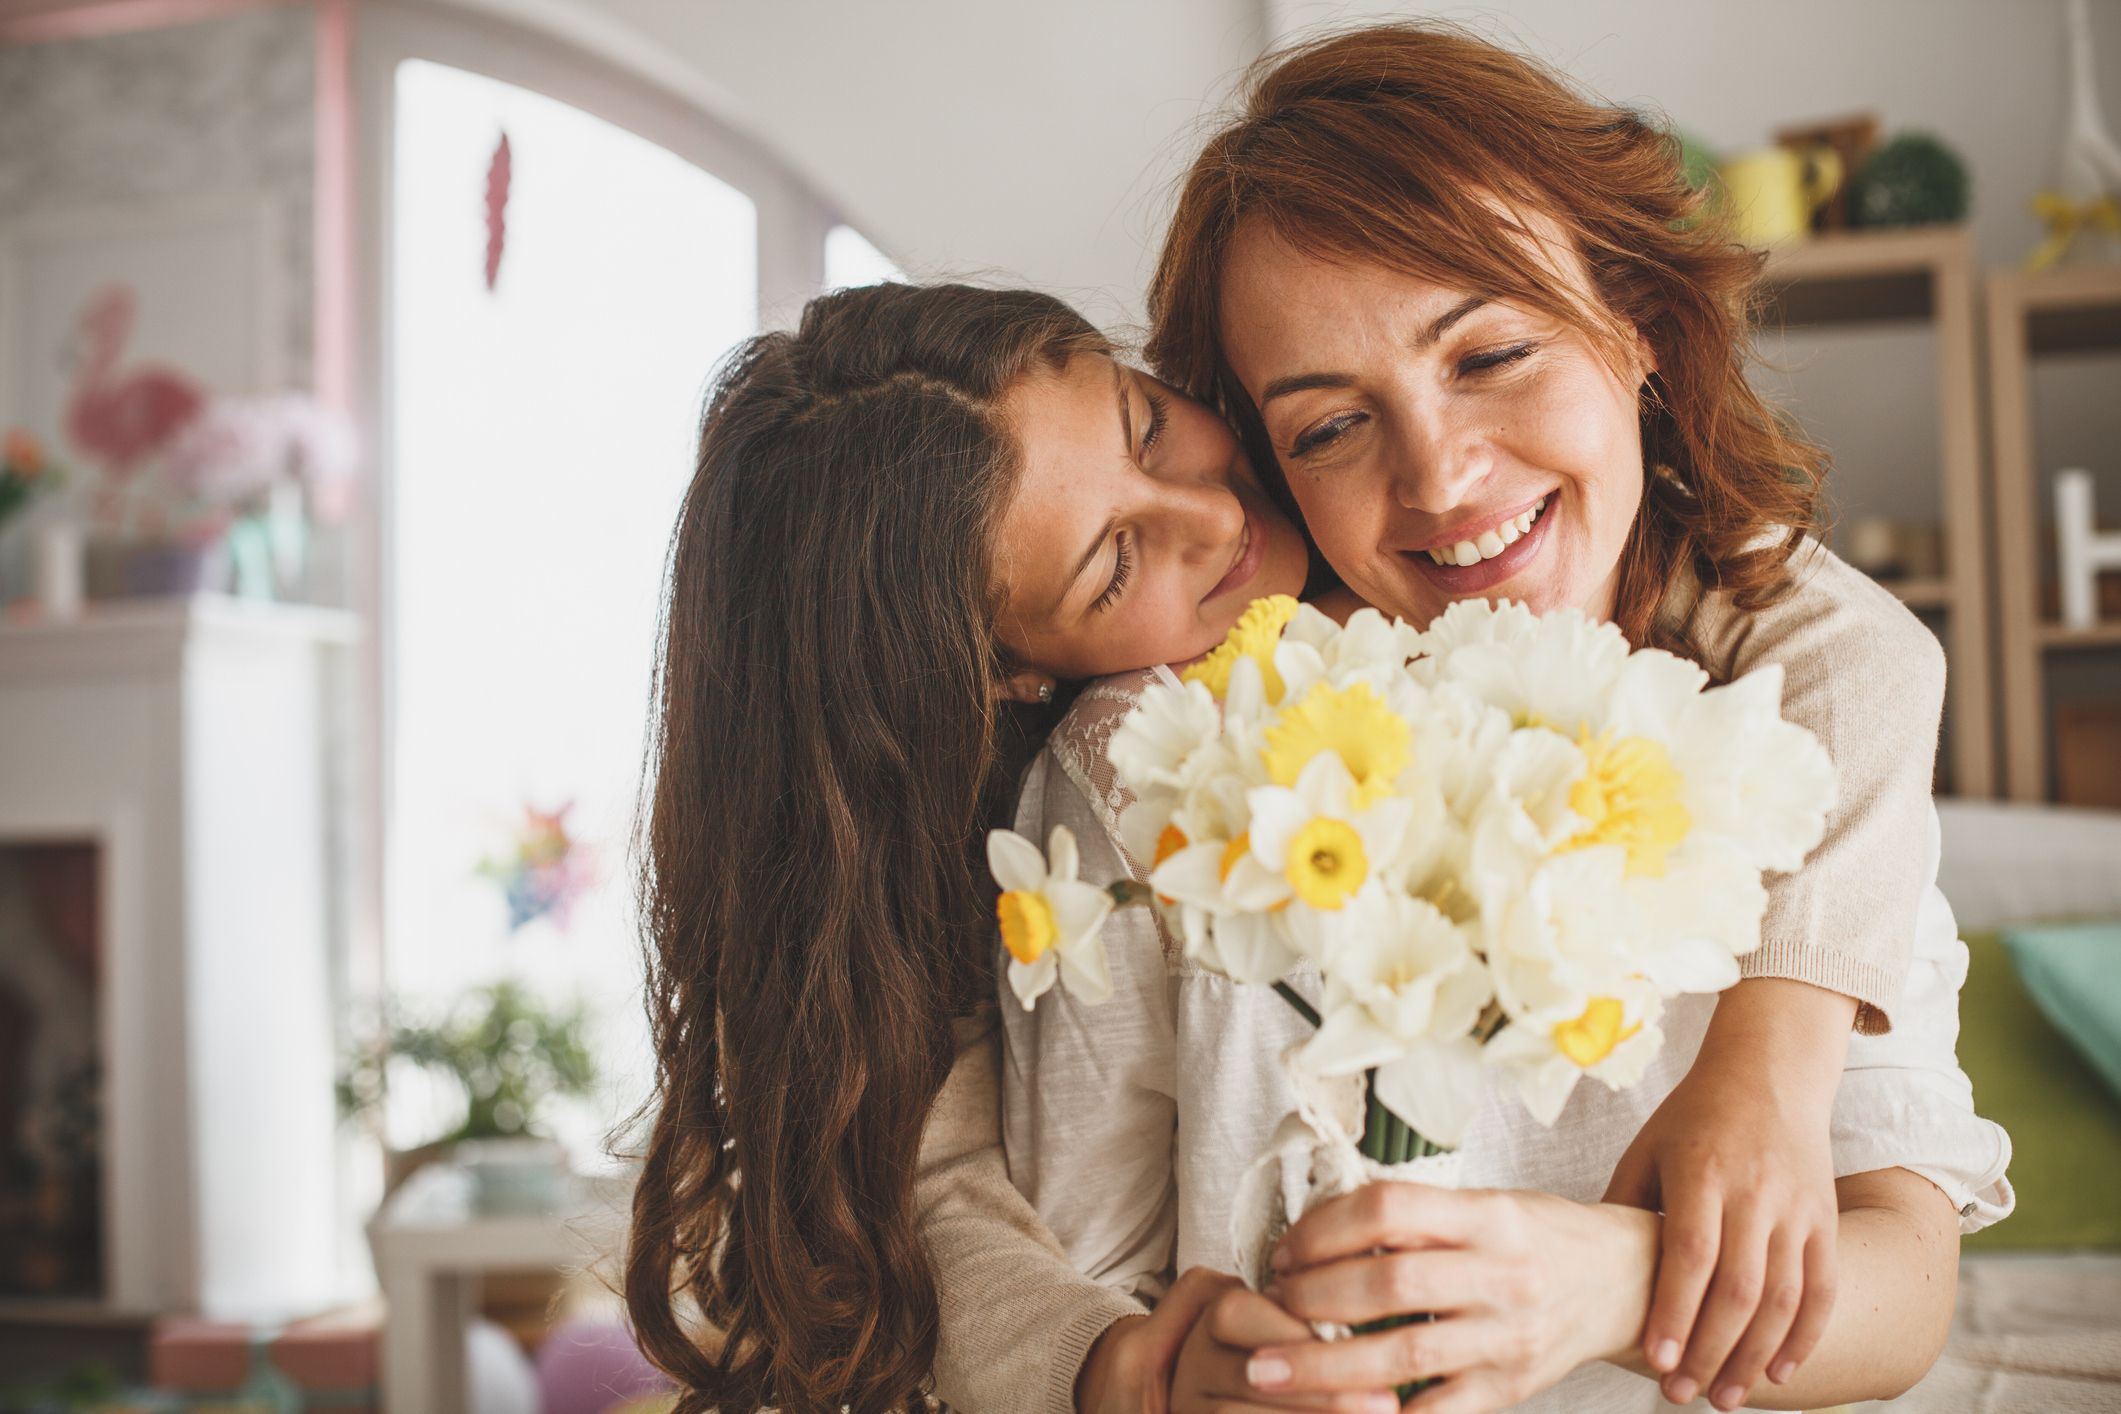 A COVID-19 guide to Mother's Day gifts